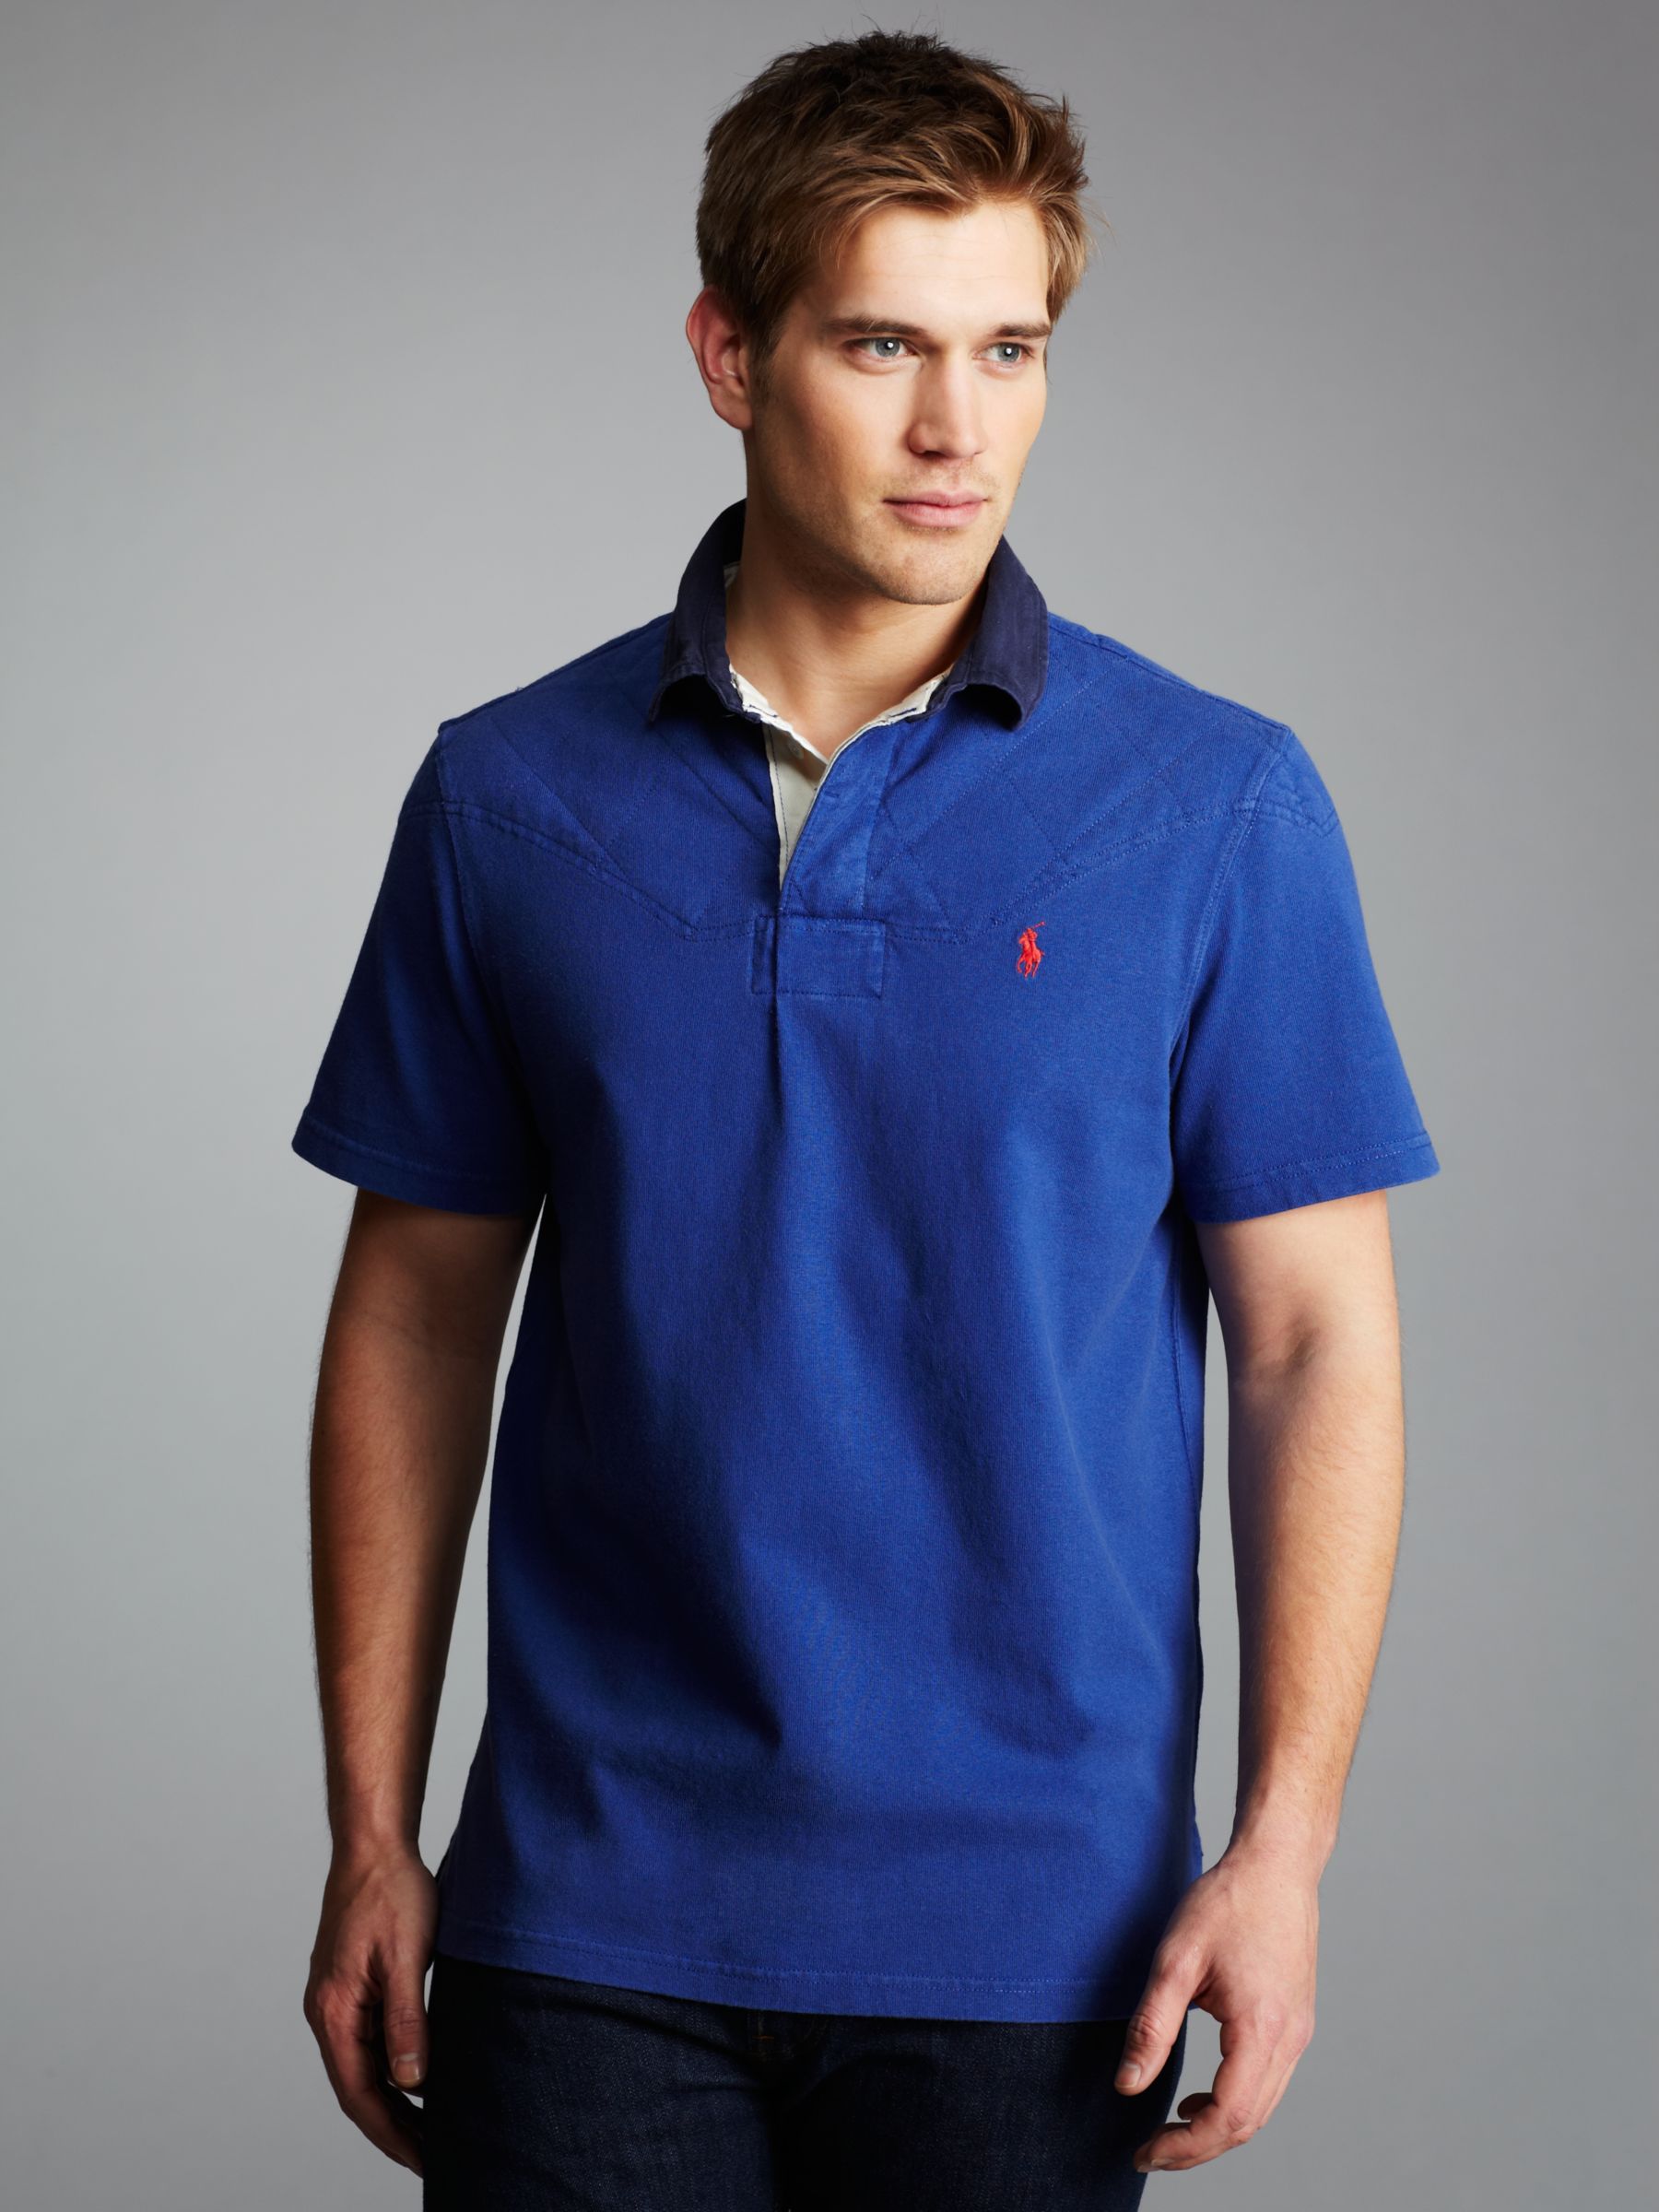 Quilted Rugby Shirt, Marlin Blue